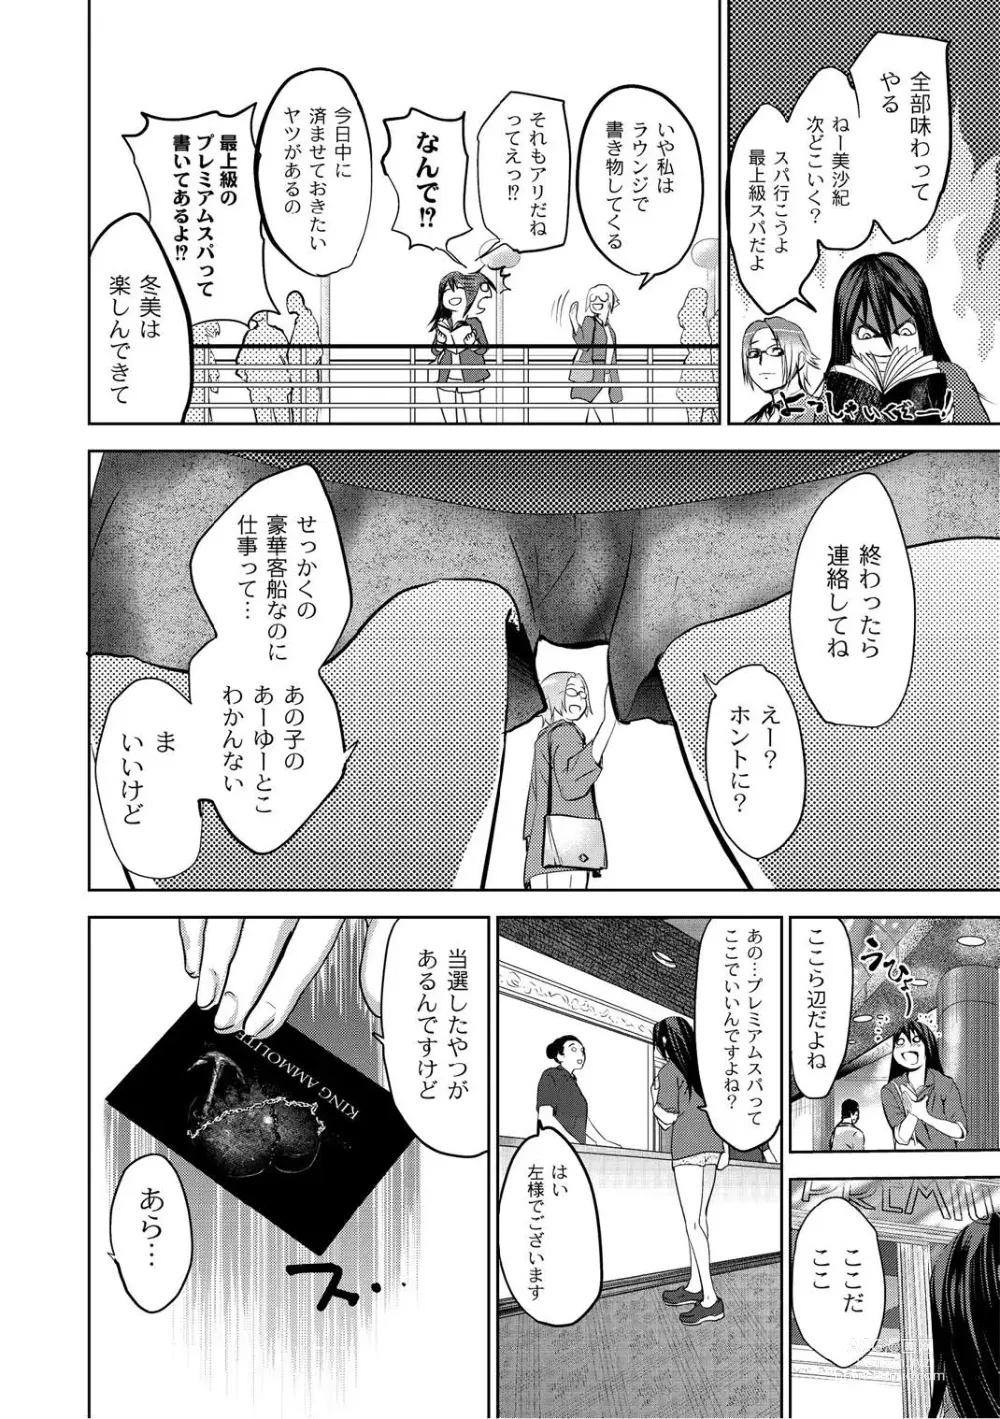 Page 5 of manga Monthly QooPA 2014-10